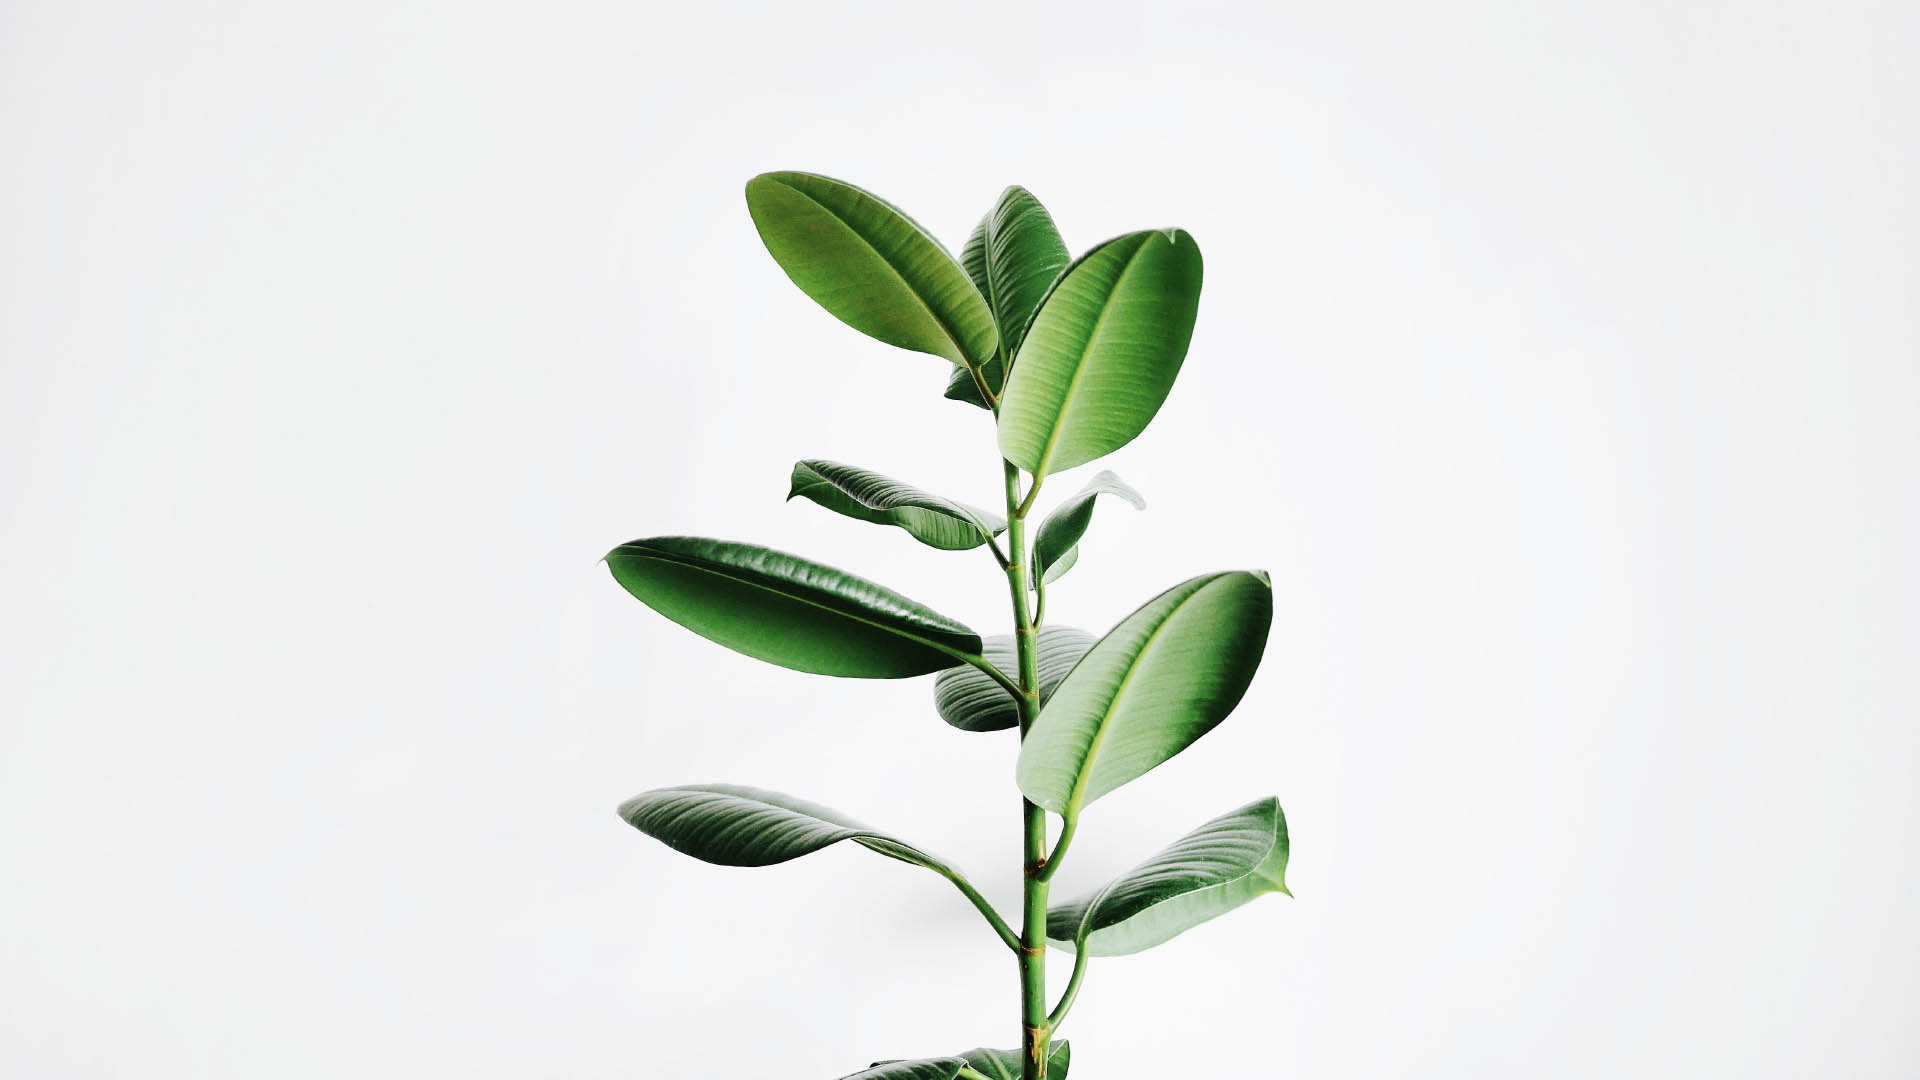 A green plant with leaves in front of a white background